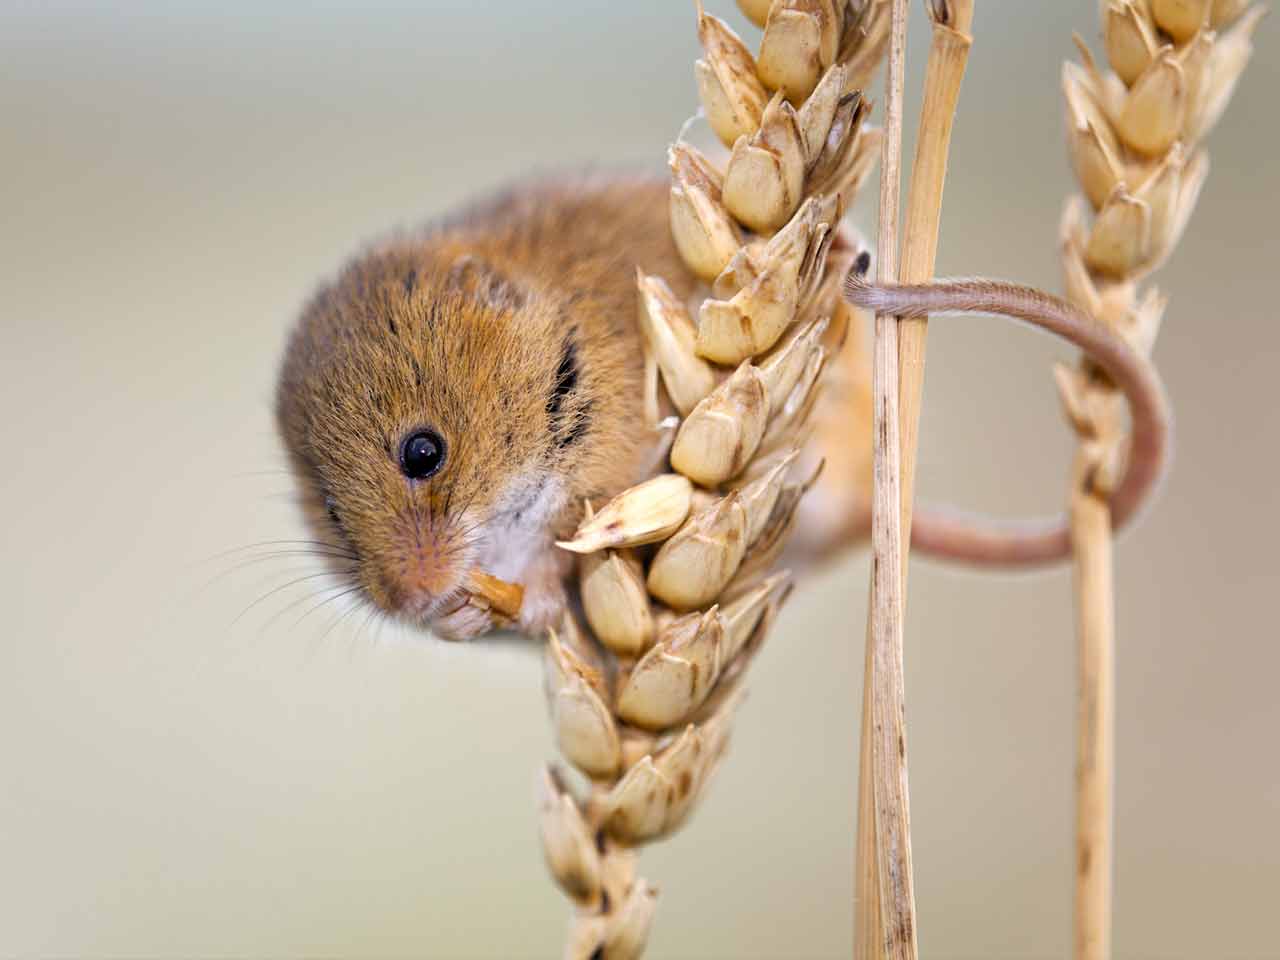 Harvest mouse photographed by David Chapman